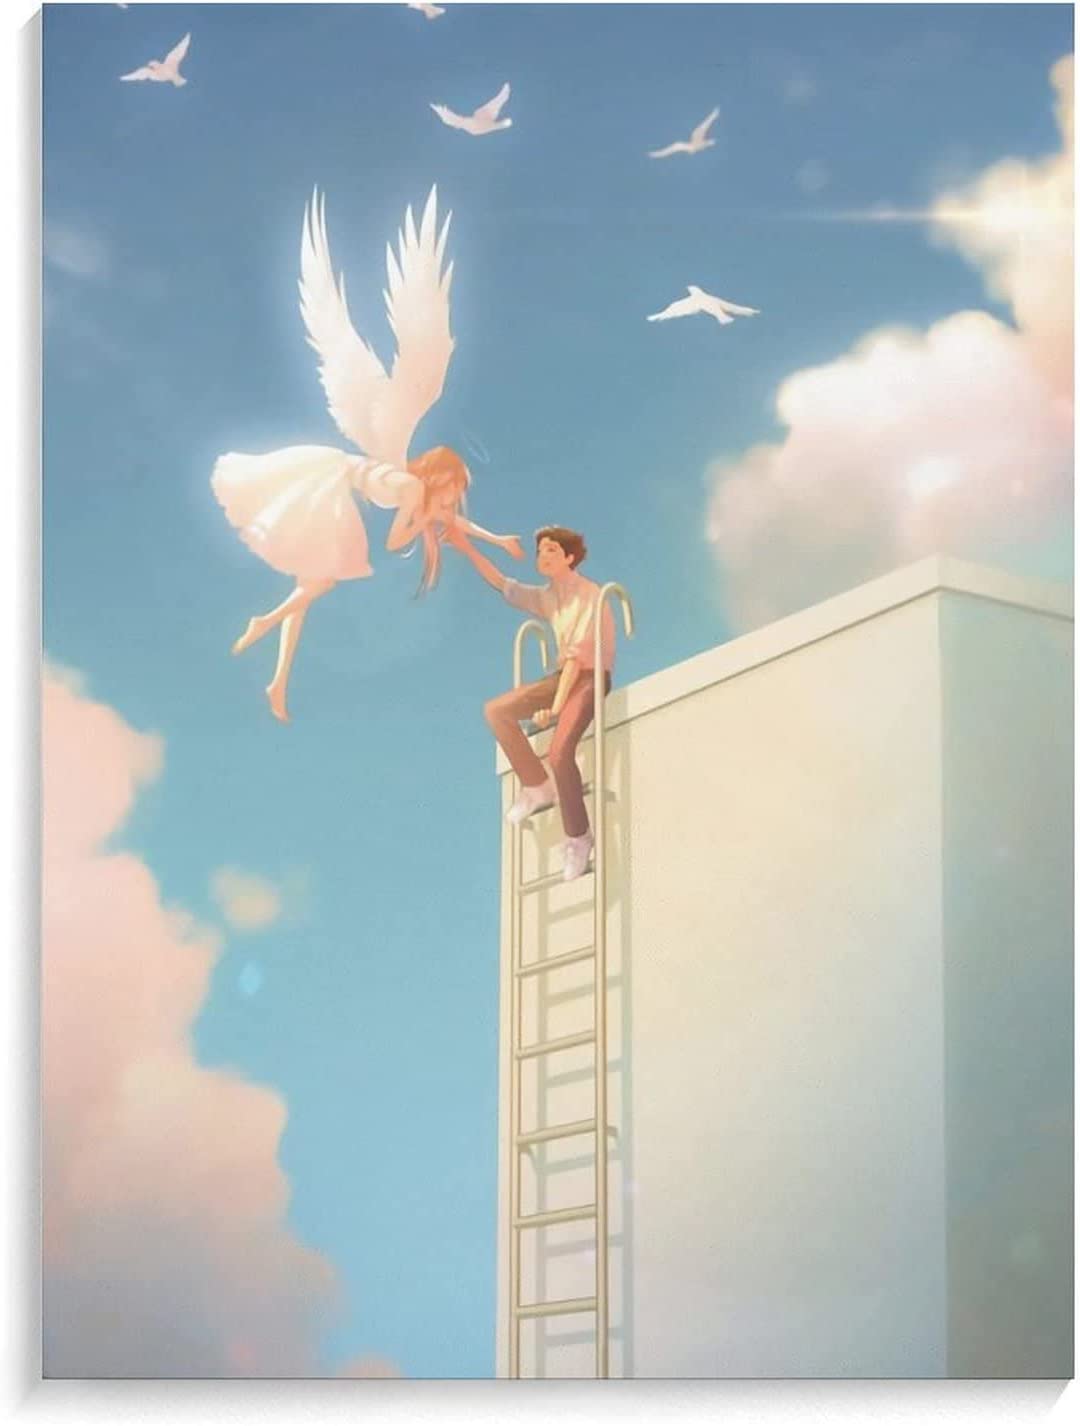 Holding Hands with Angel Poster for Aesthetic Room Decor Merch Art Wall Print Wallpaper for Bedroom for Teen Girls Boys 30 * 40cm : Amazon.ca: Home